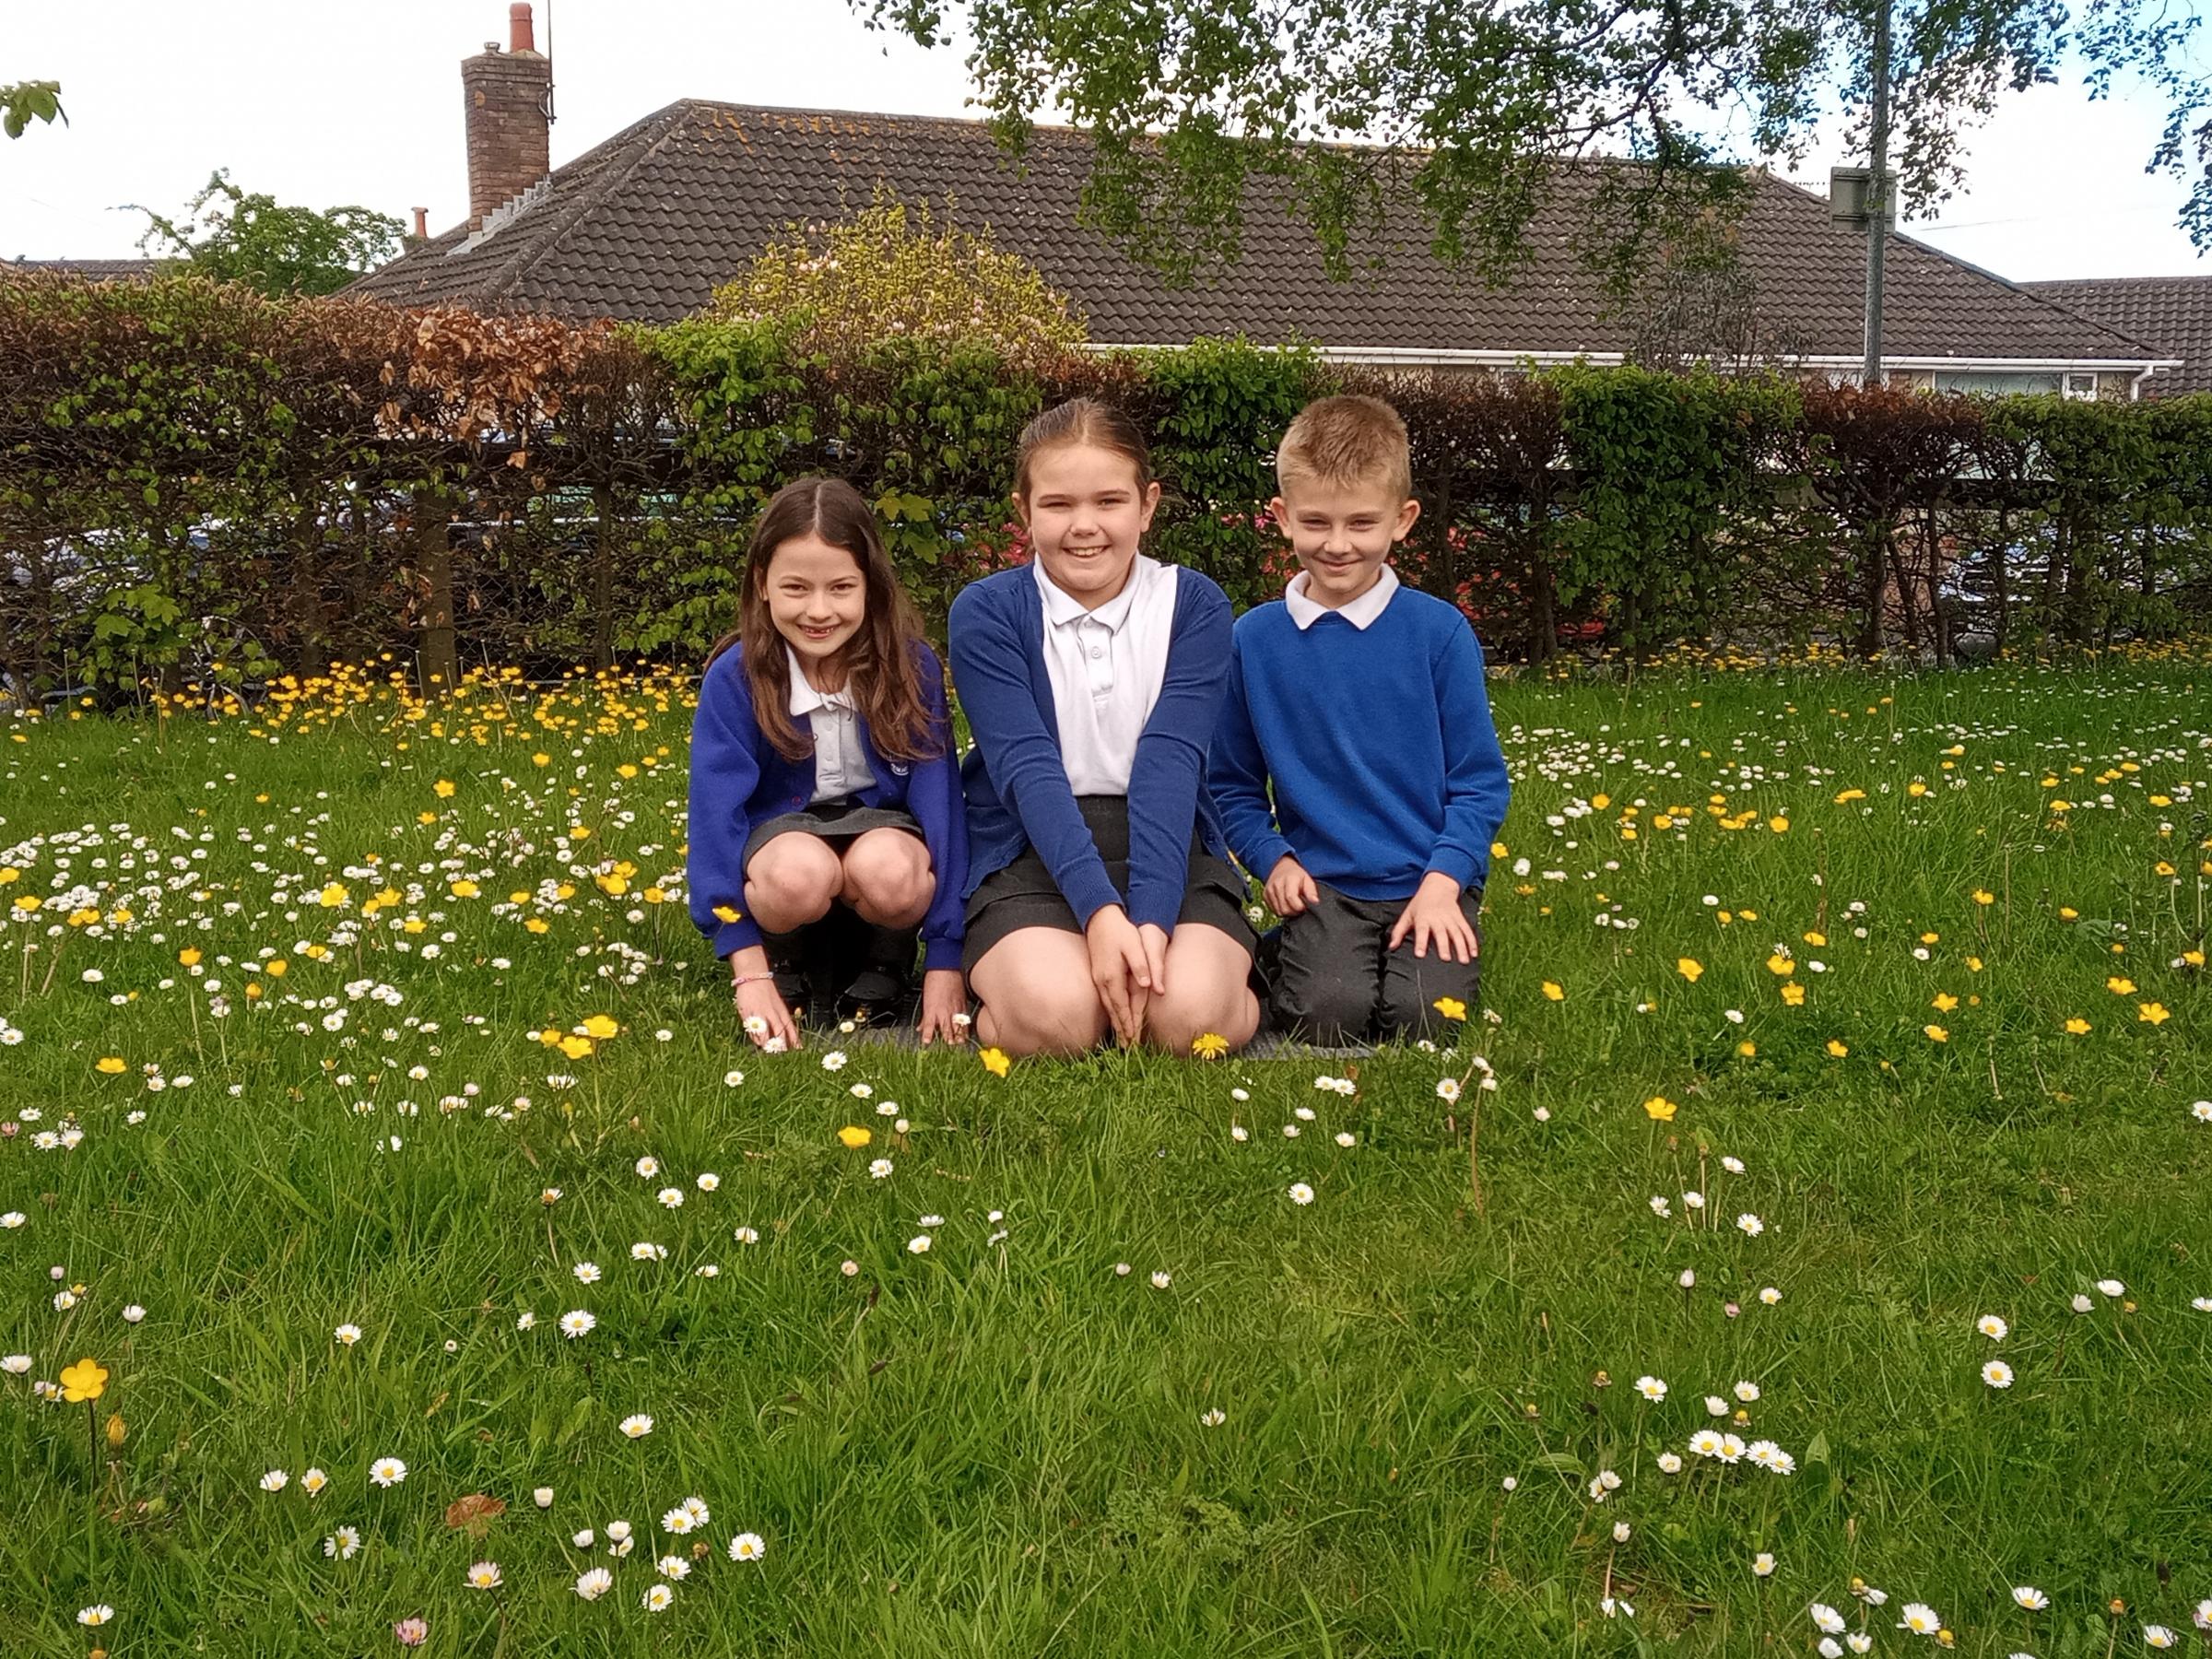 Drury Primary pupils Libby Wynne, Iris Williams and Leighton Holland among the daisies and dandelions during No Mow May.